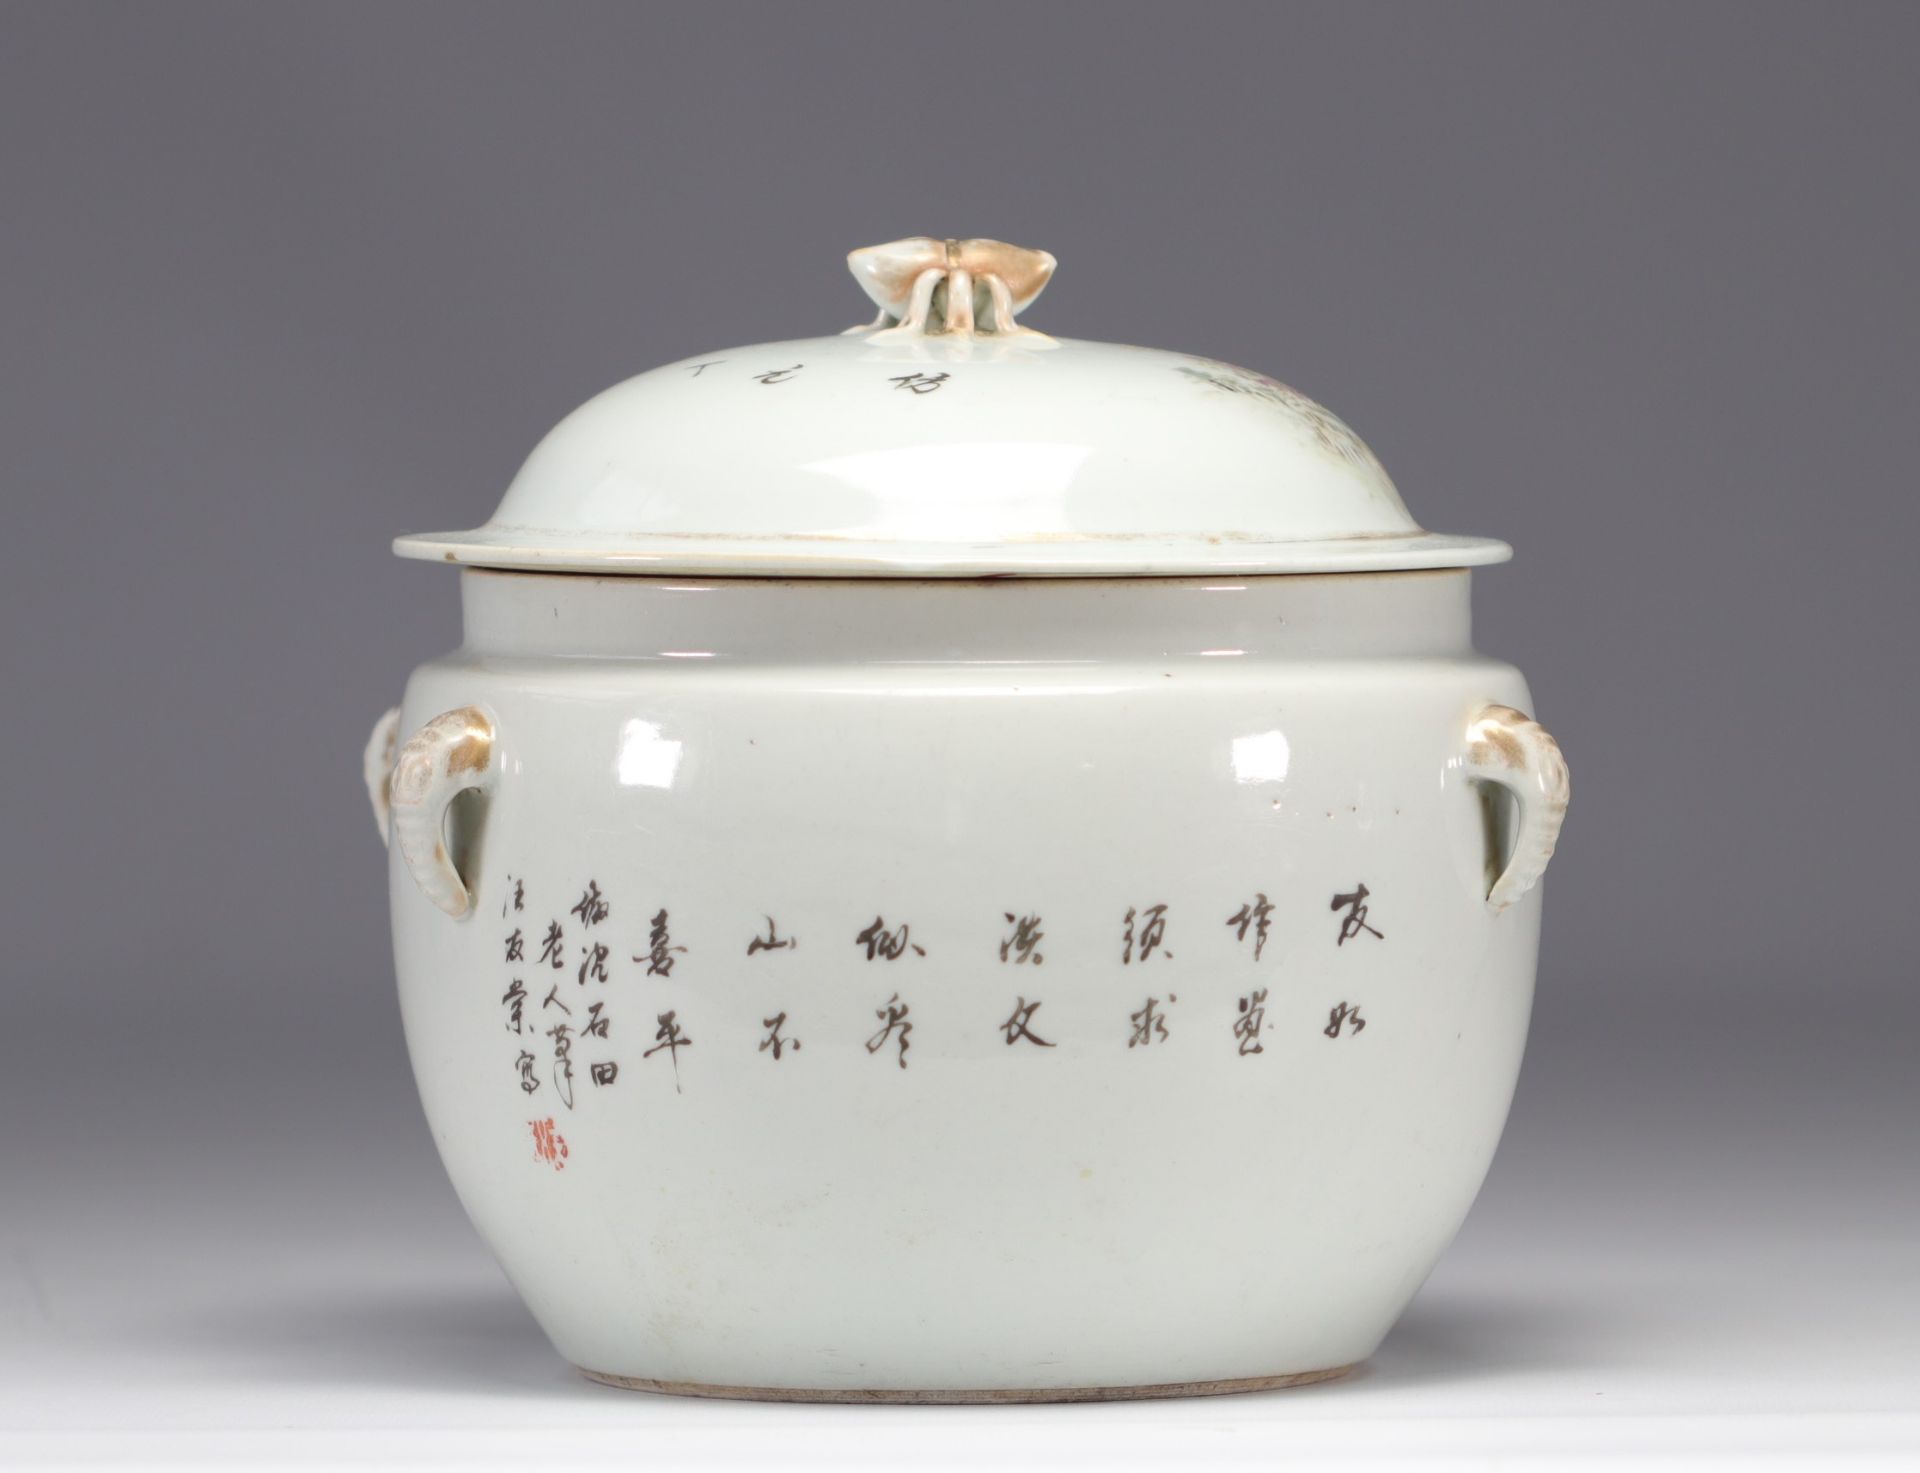 Covered Chinese porcelain tureen decorated with mountain landscapes - Image 2 of 4